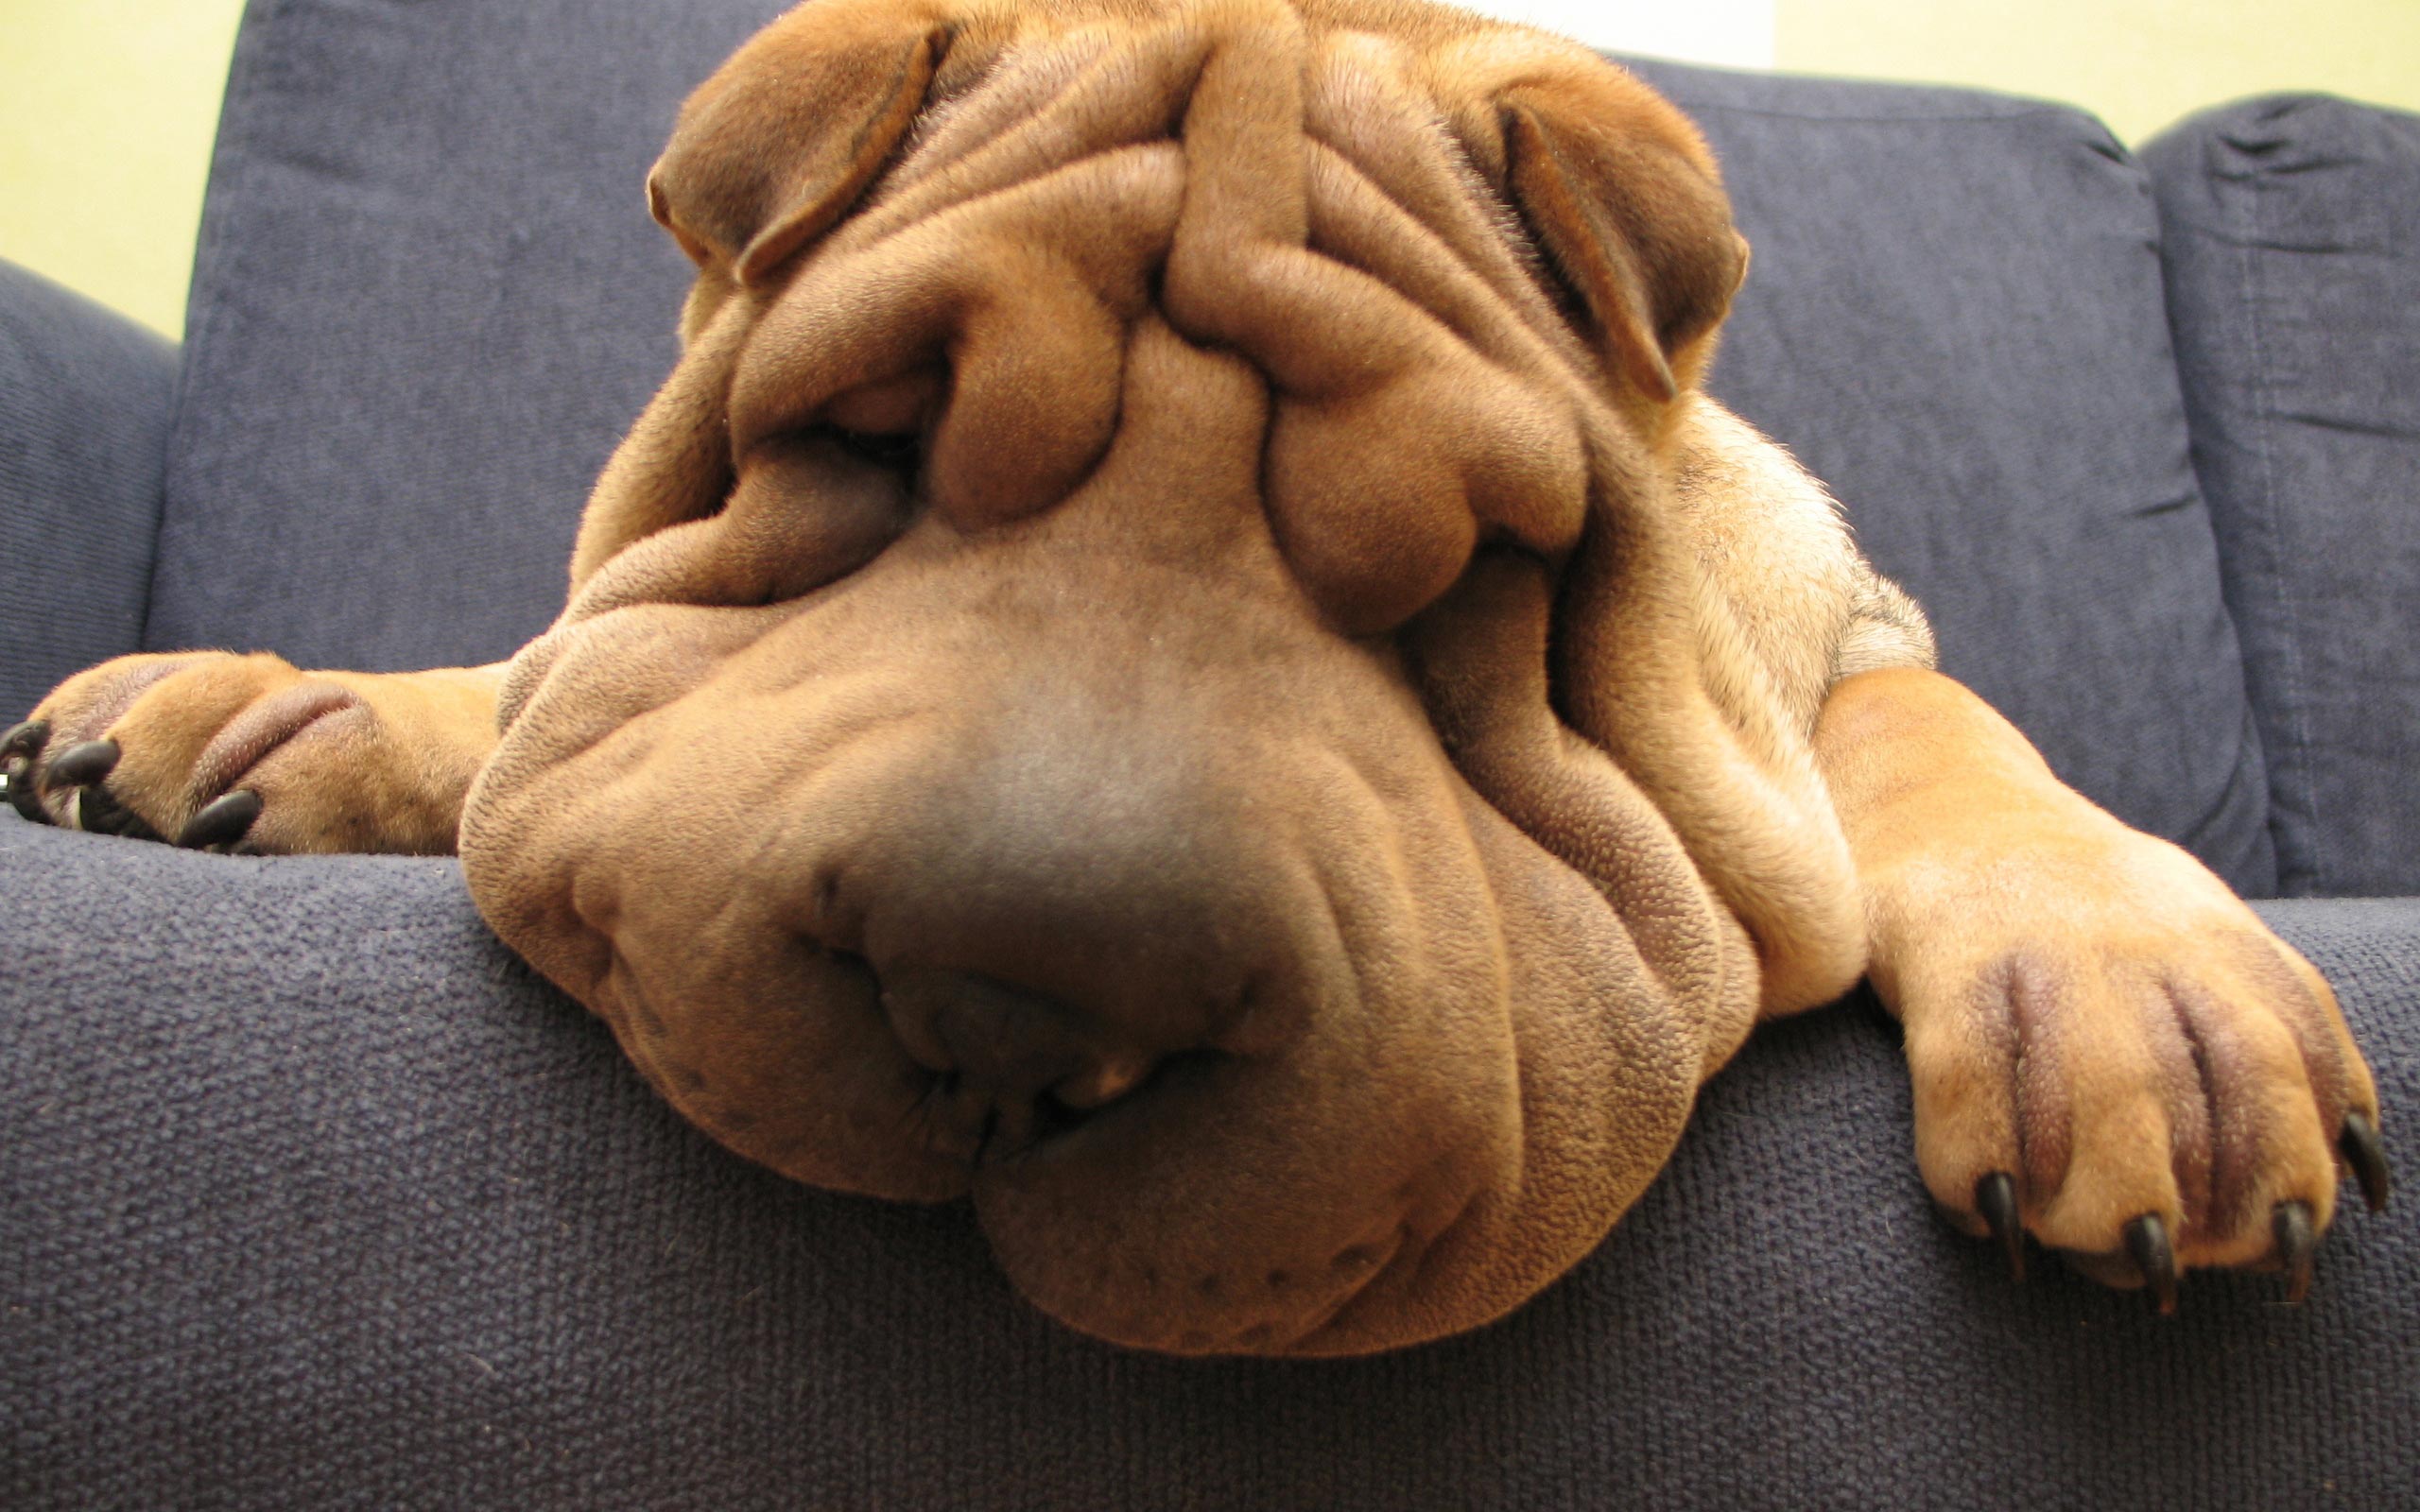 Well, basically any dog is, but the Shar Pei is definitely at the top of the list. Just look at this little guy!